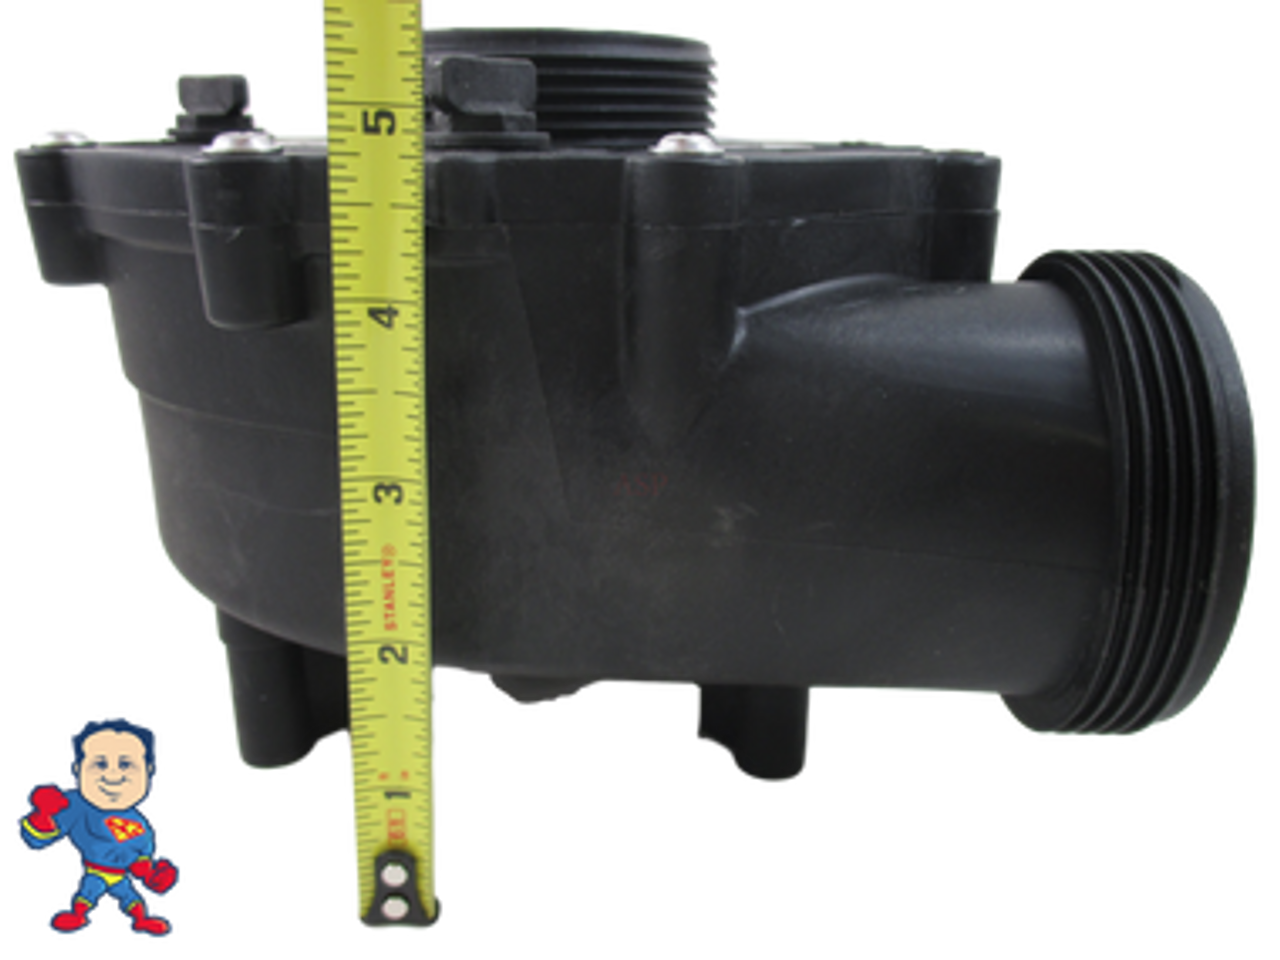 2.5HP Pump Wet End Fits MAY 2009+ JACUZZI® PREMIUM OR SUNDANCE® 6500-352, 6500-365, 6500-367 or 6500-363 with WUA400